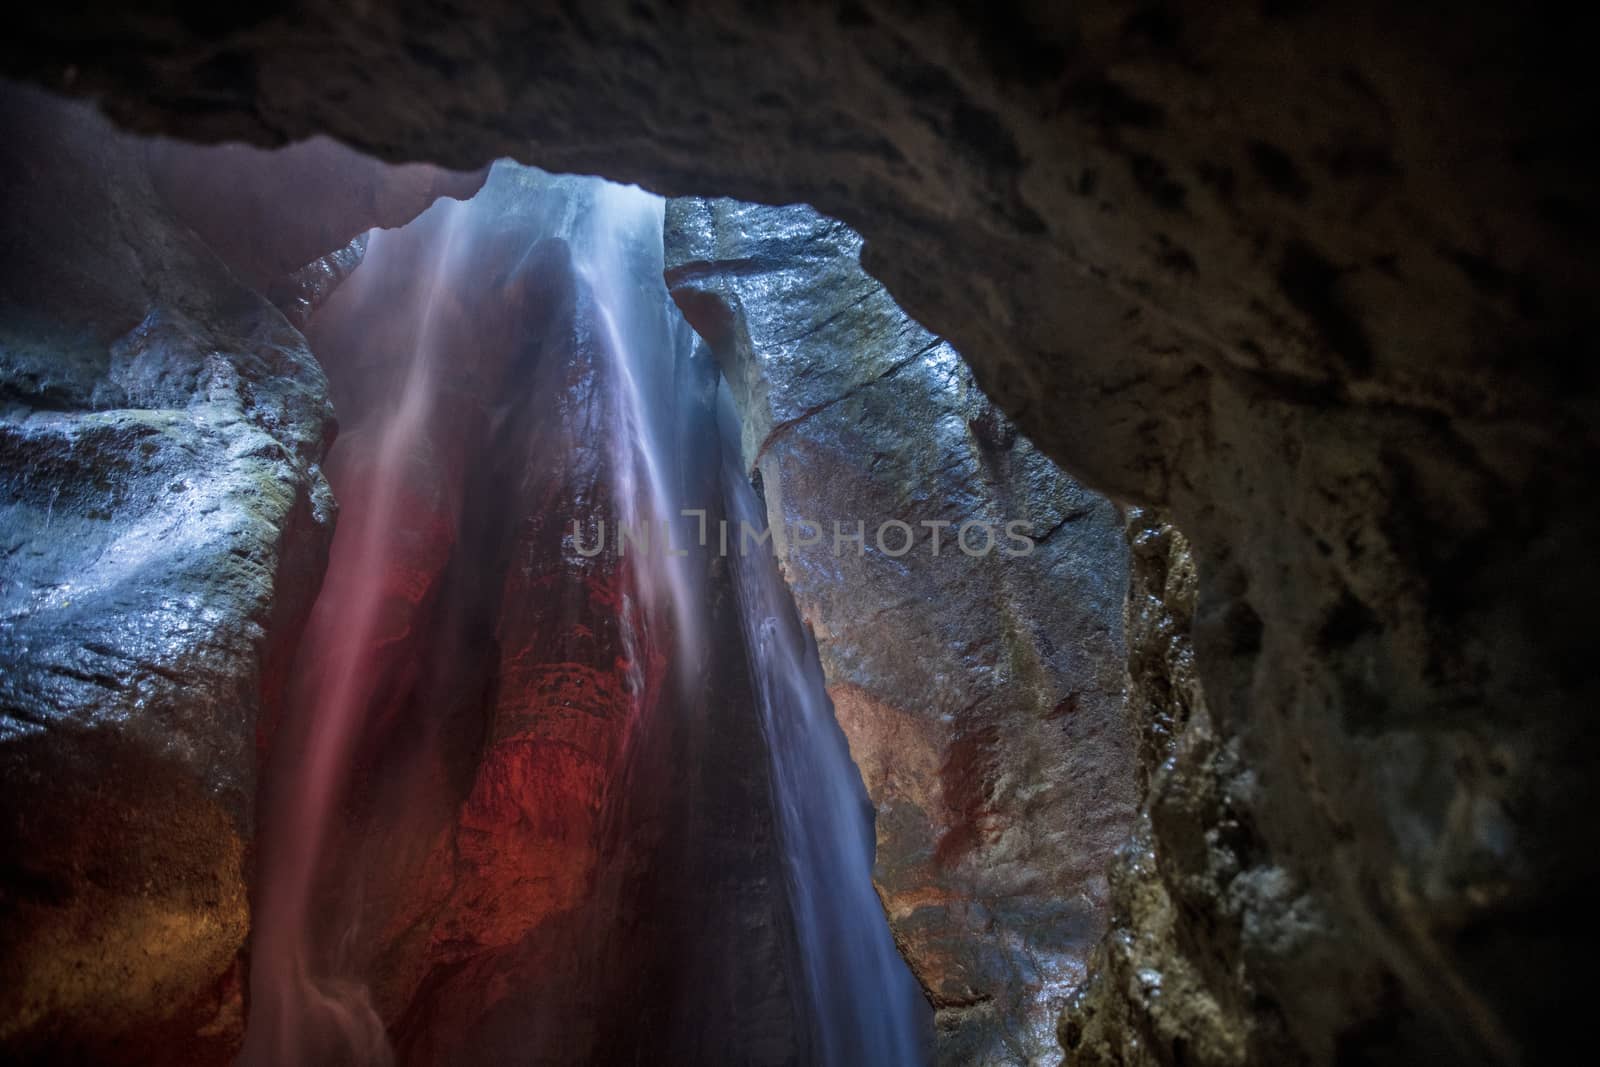 Varone, Lake Garda, Italy, Europe, August 2019, a view of the Varone Cascata waterfalls and caverns